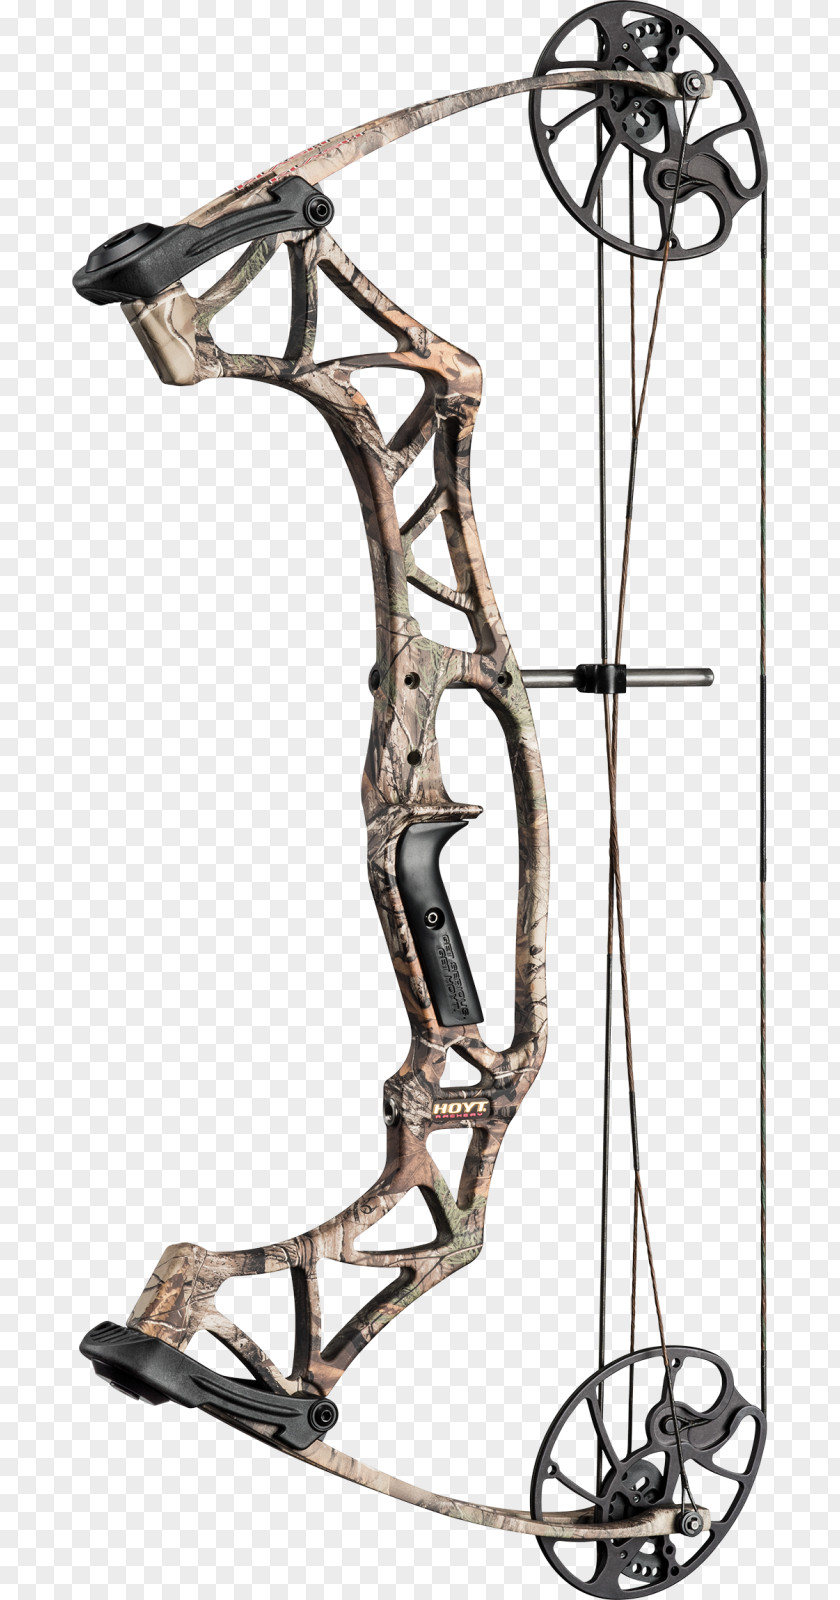 Mounted Archery Bow And Arrow Compound Bows Bowhunting PNG